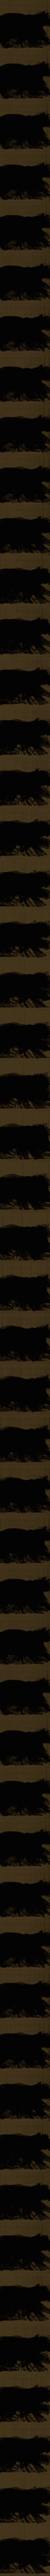 Cat Trotting, Changing To A Gallop (Multiply-14-0.057-17)